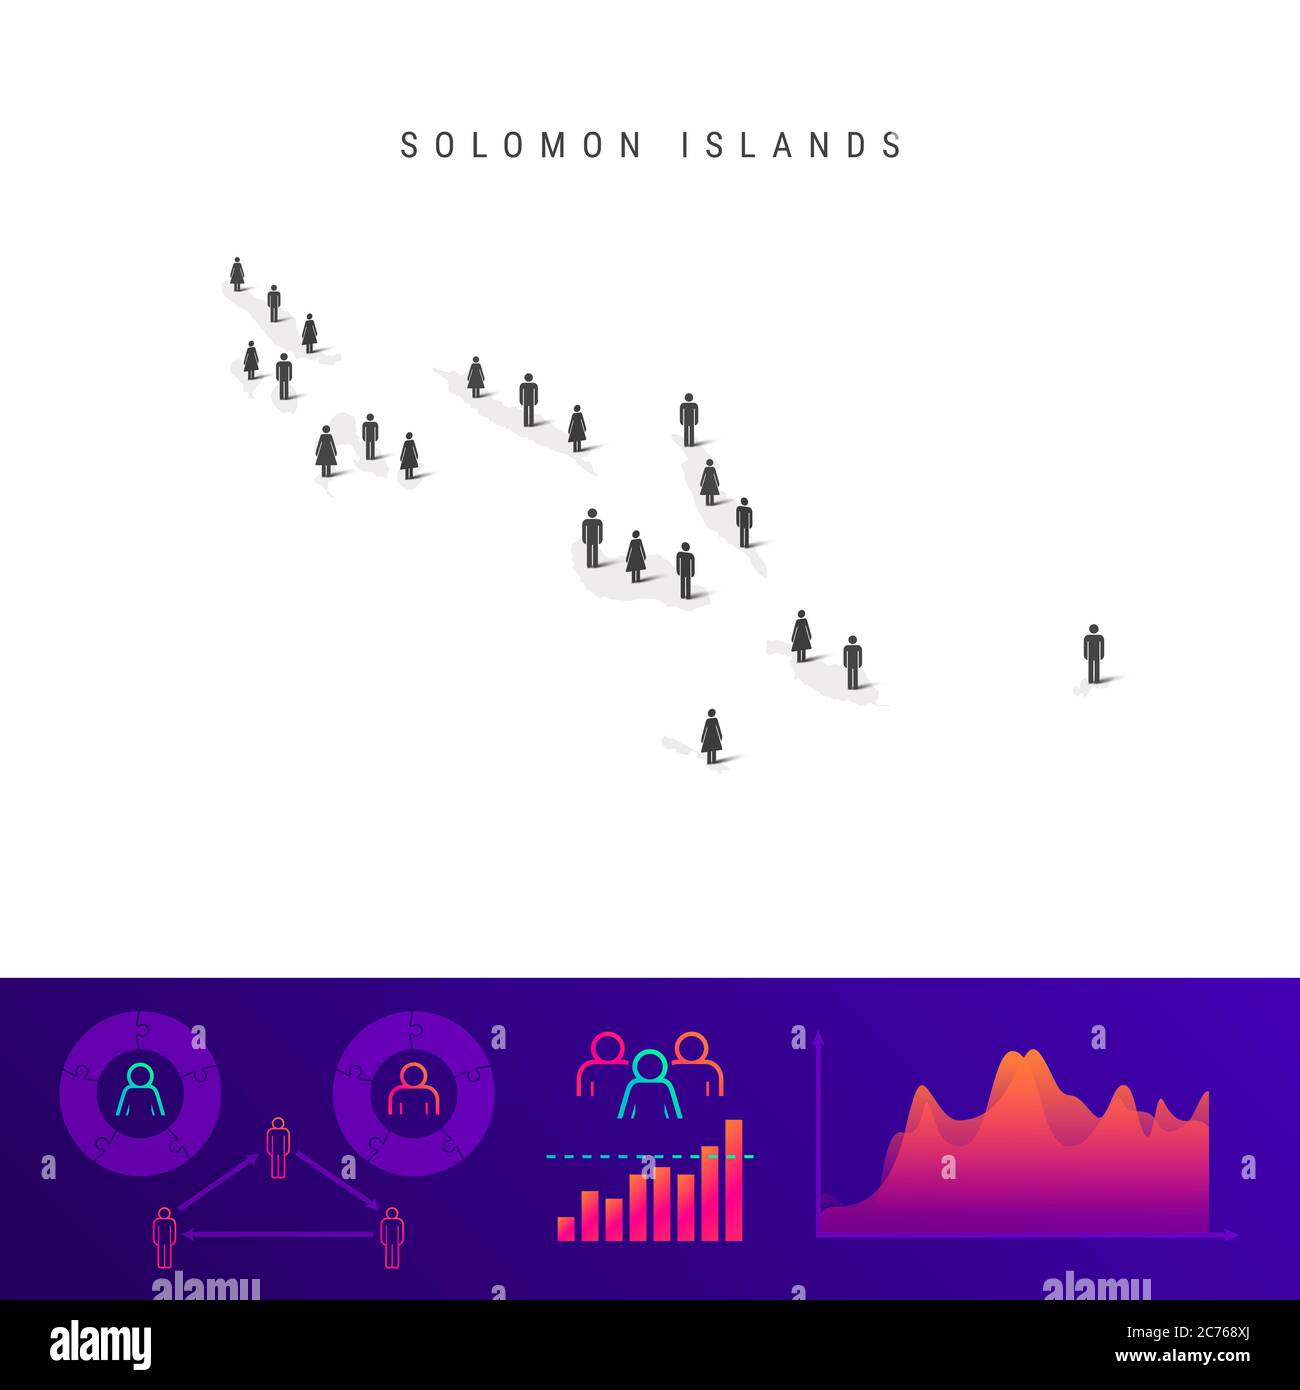 Solomon Islands people map. Detailed silhouette. Mixed crowd of men and women icons. Population infographic elements. illustration isolated on white. Stock Photo